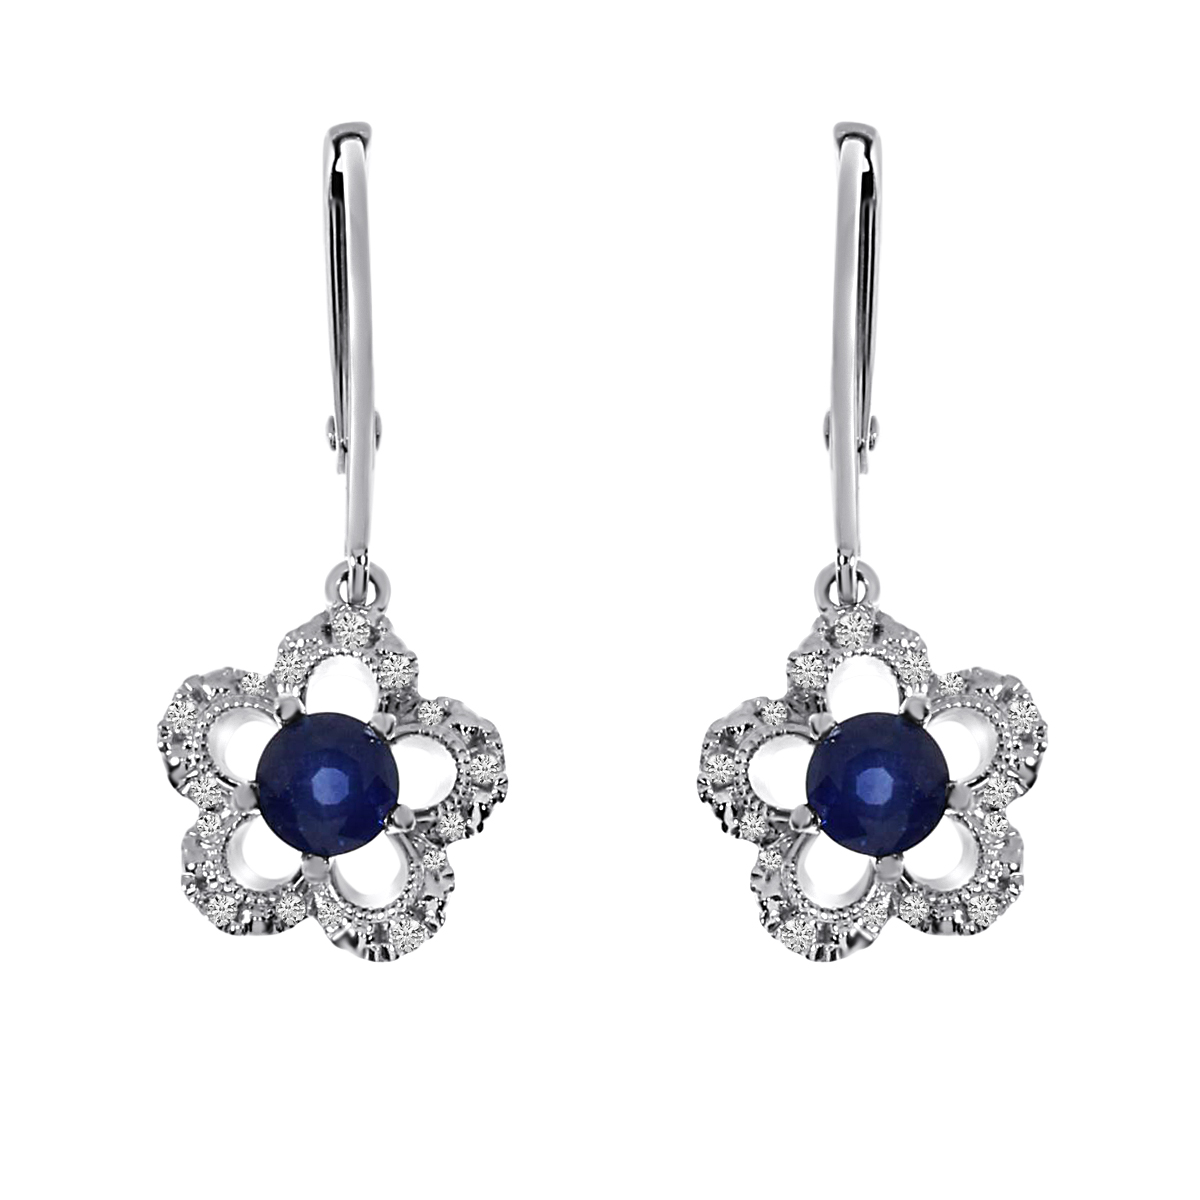 JCX2108: Floral shaped earrings in 14k white gold with 4 mm round sapphires and .11 ct diamonds.